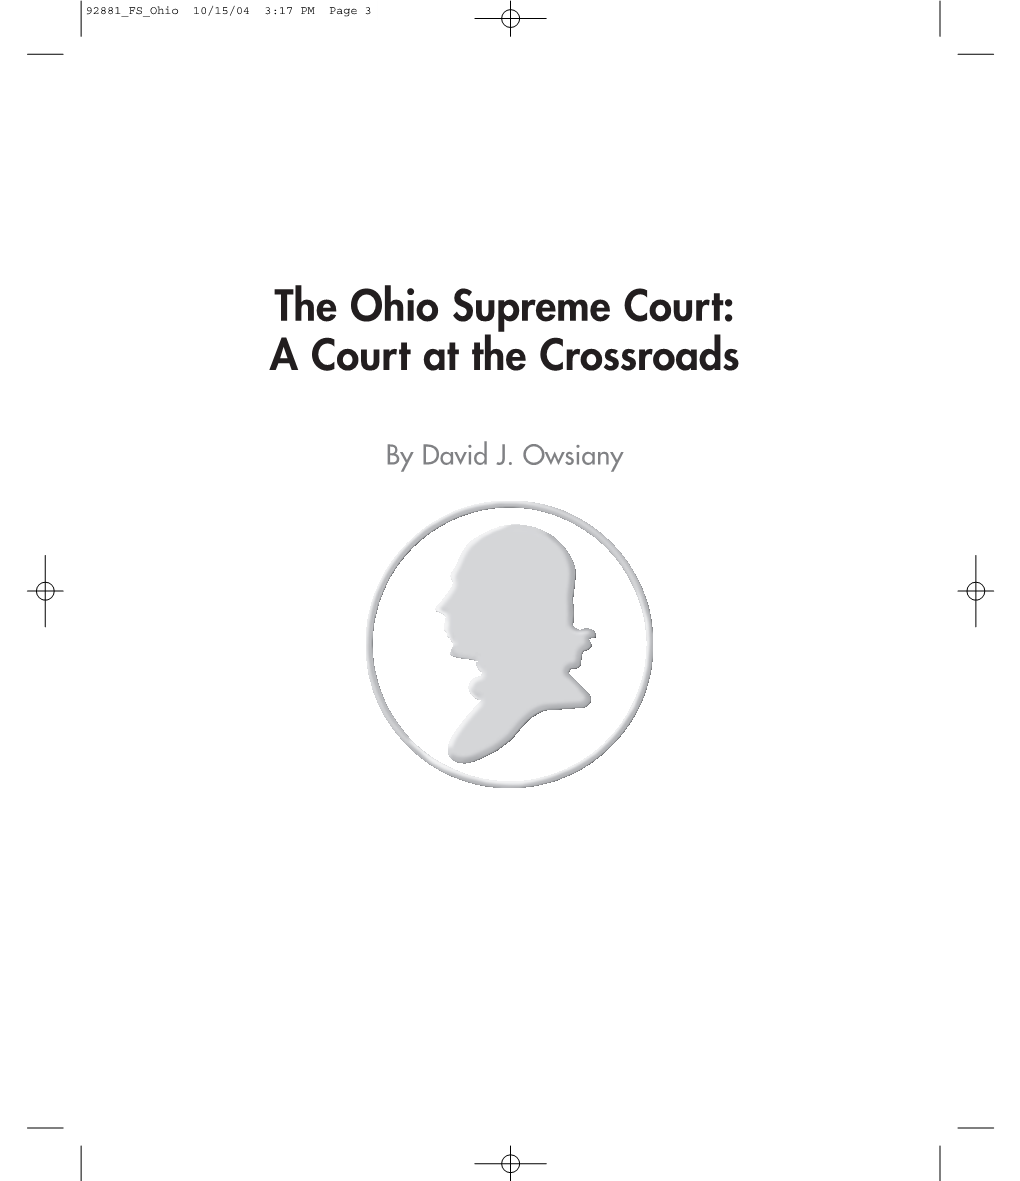 The Ohio Supreme Court: a Court at the Crossroads